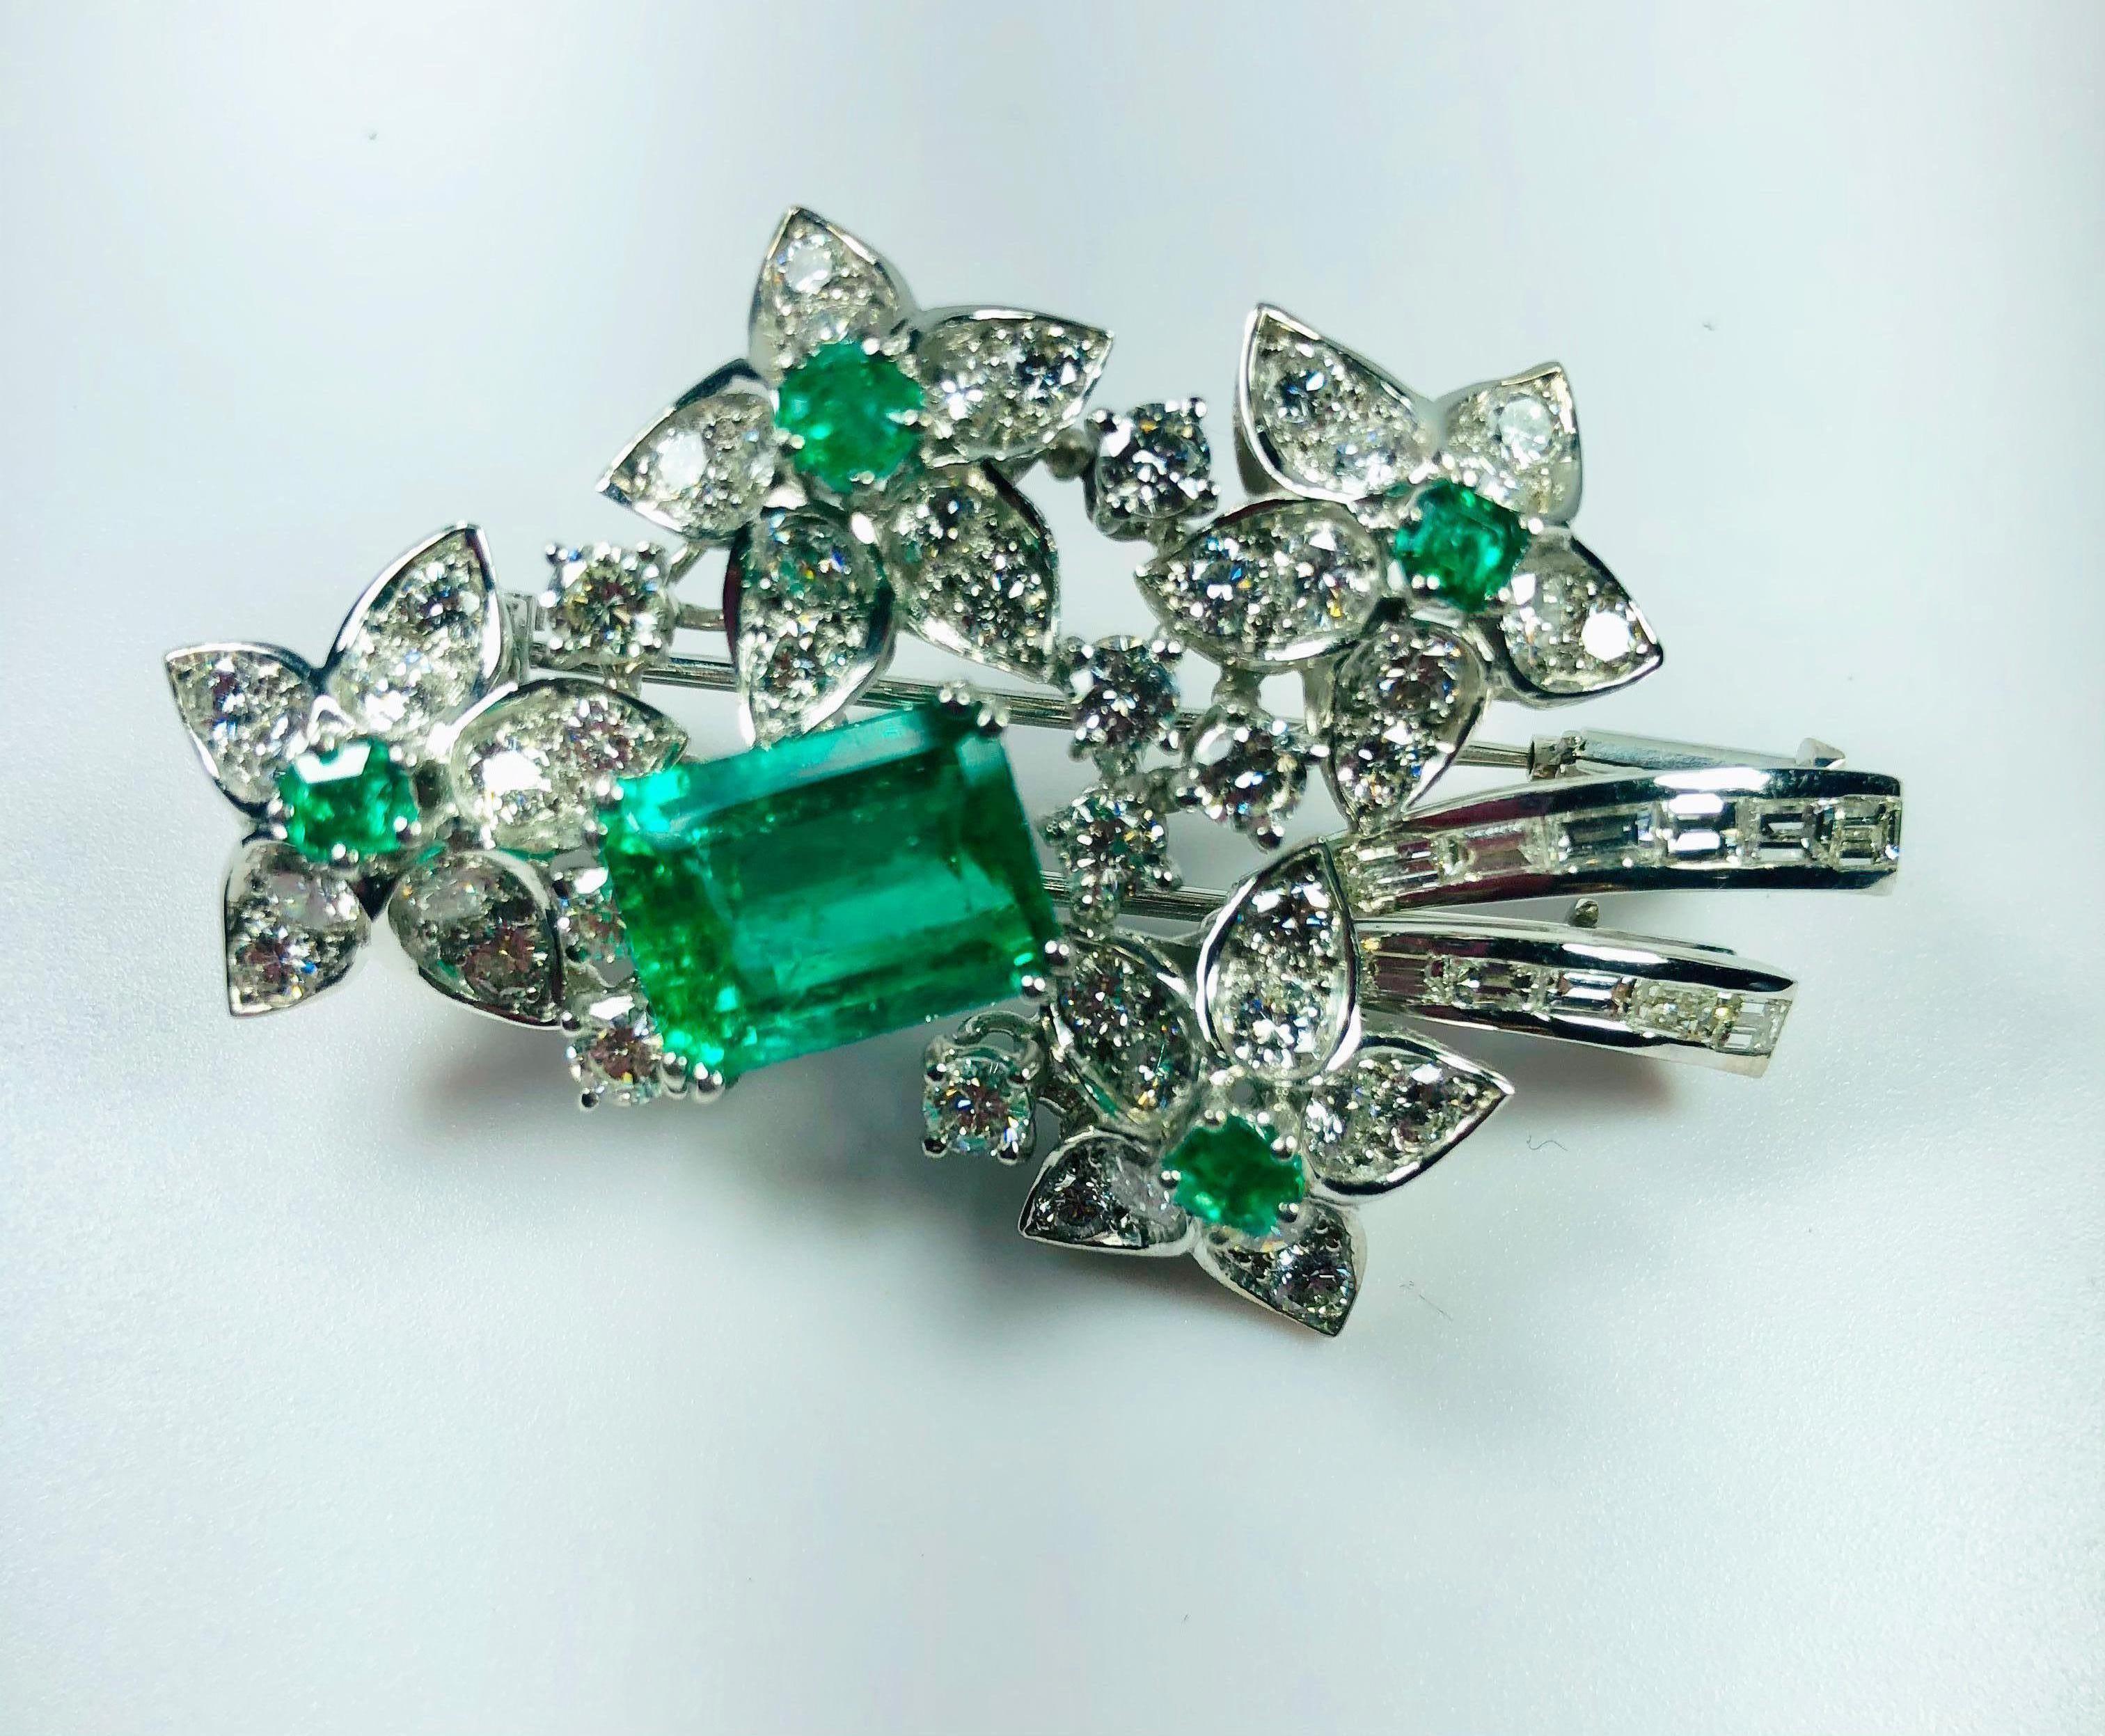 
Beautiful Flower Brooche Colombian Emerald shape Emerald
A remarkable deep transparent green 7.44 ct Colombian emerald
Emerald size: 13.18 x 10.37 x 6.73 mm.

MATERIALS
◘ Weight 24 grams 
◘ Size Broche 52cm / 20,47inches
◘ Baguettes and brilliant 